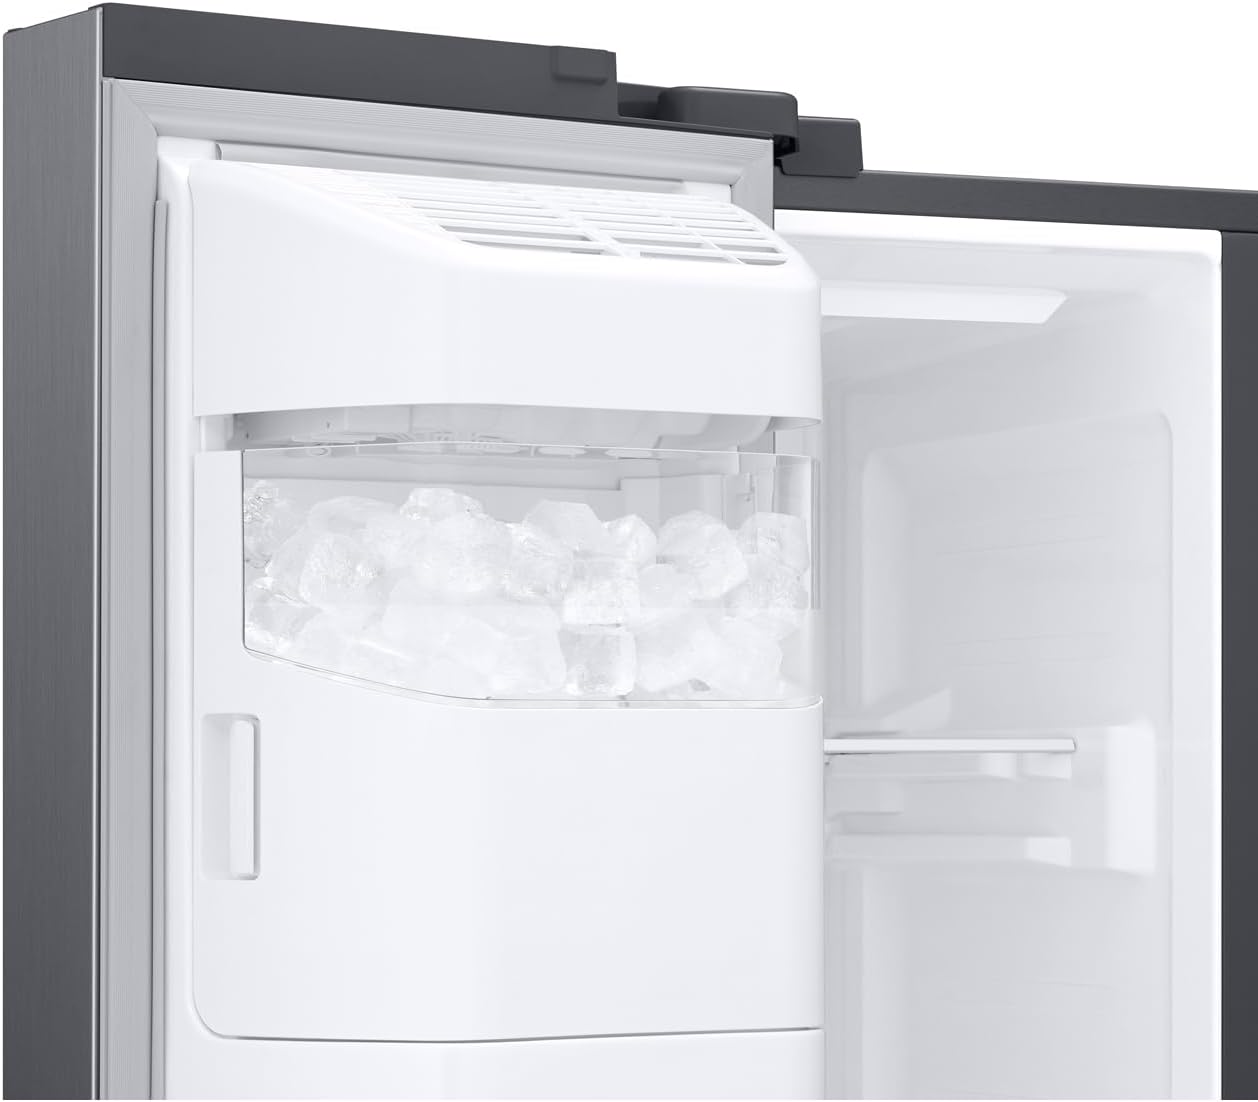 Samsung Series 7 American Style Fridge Freezer, Features SpaceMax™ and Twin Cooling Plus™ Technology, Ice Dispenser, Silver, Model: RS67A8811S9   Import  Single ASIN  Import  Multiple ASIN ×Product customization General Description Gal - Amazing Gadgets Outlet